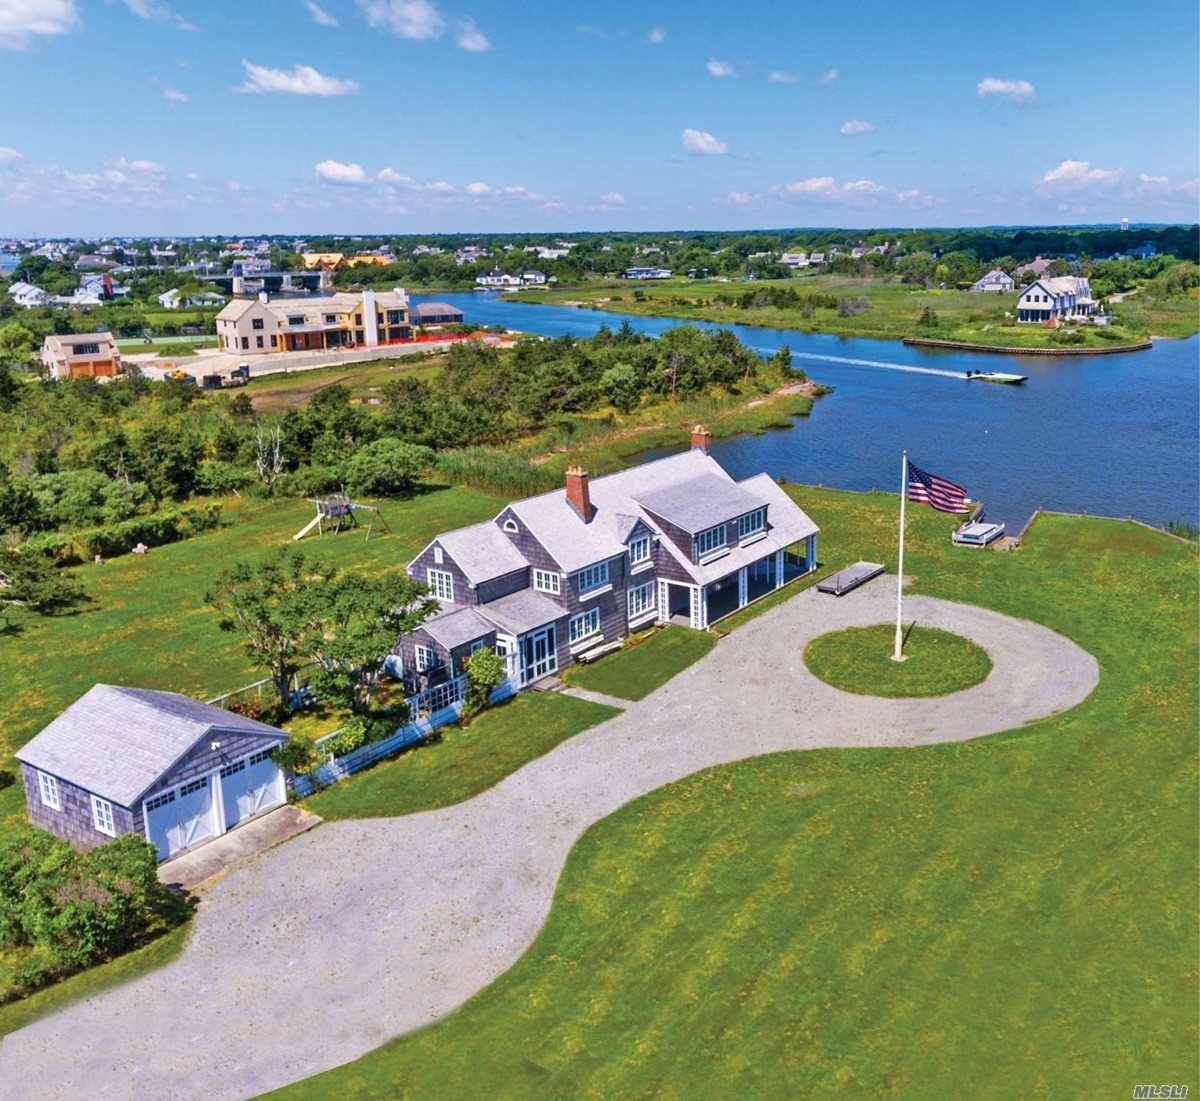 Spectacular waterfront property with gorgeous water views and over 350 feet of water frontage.